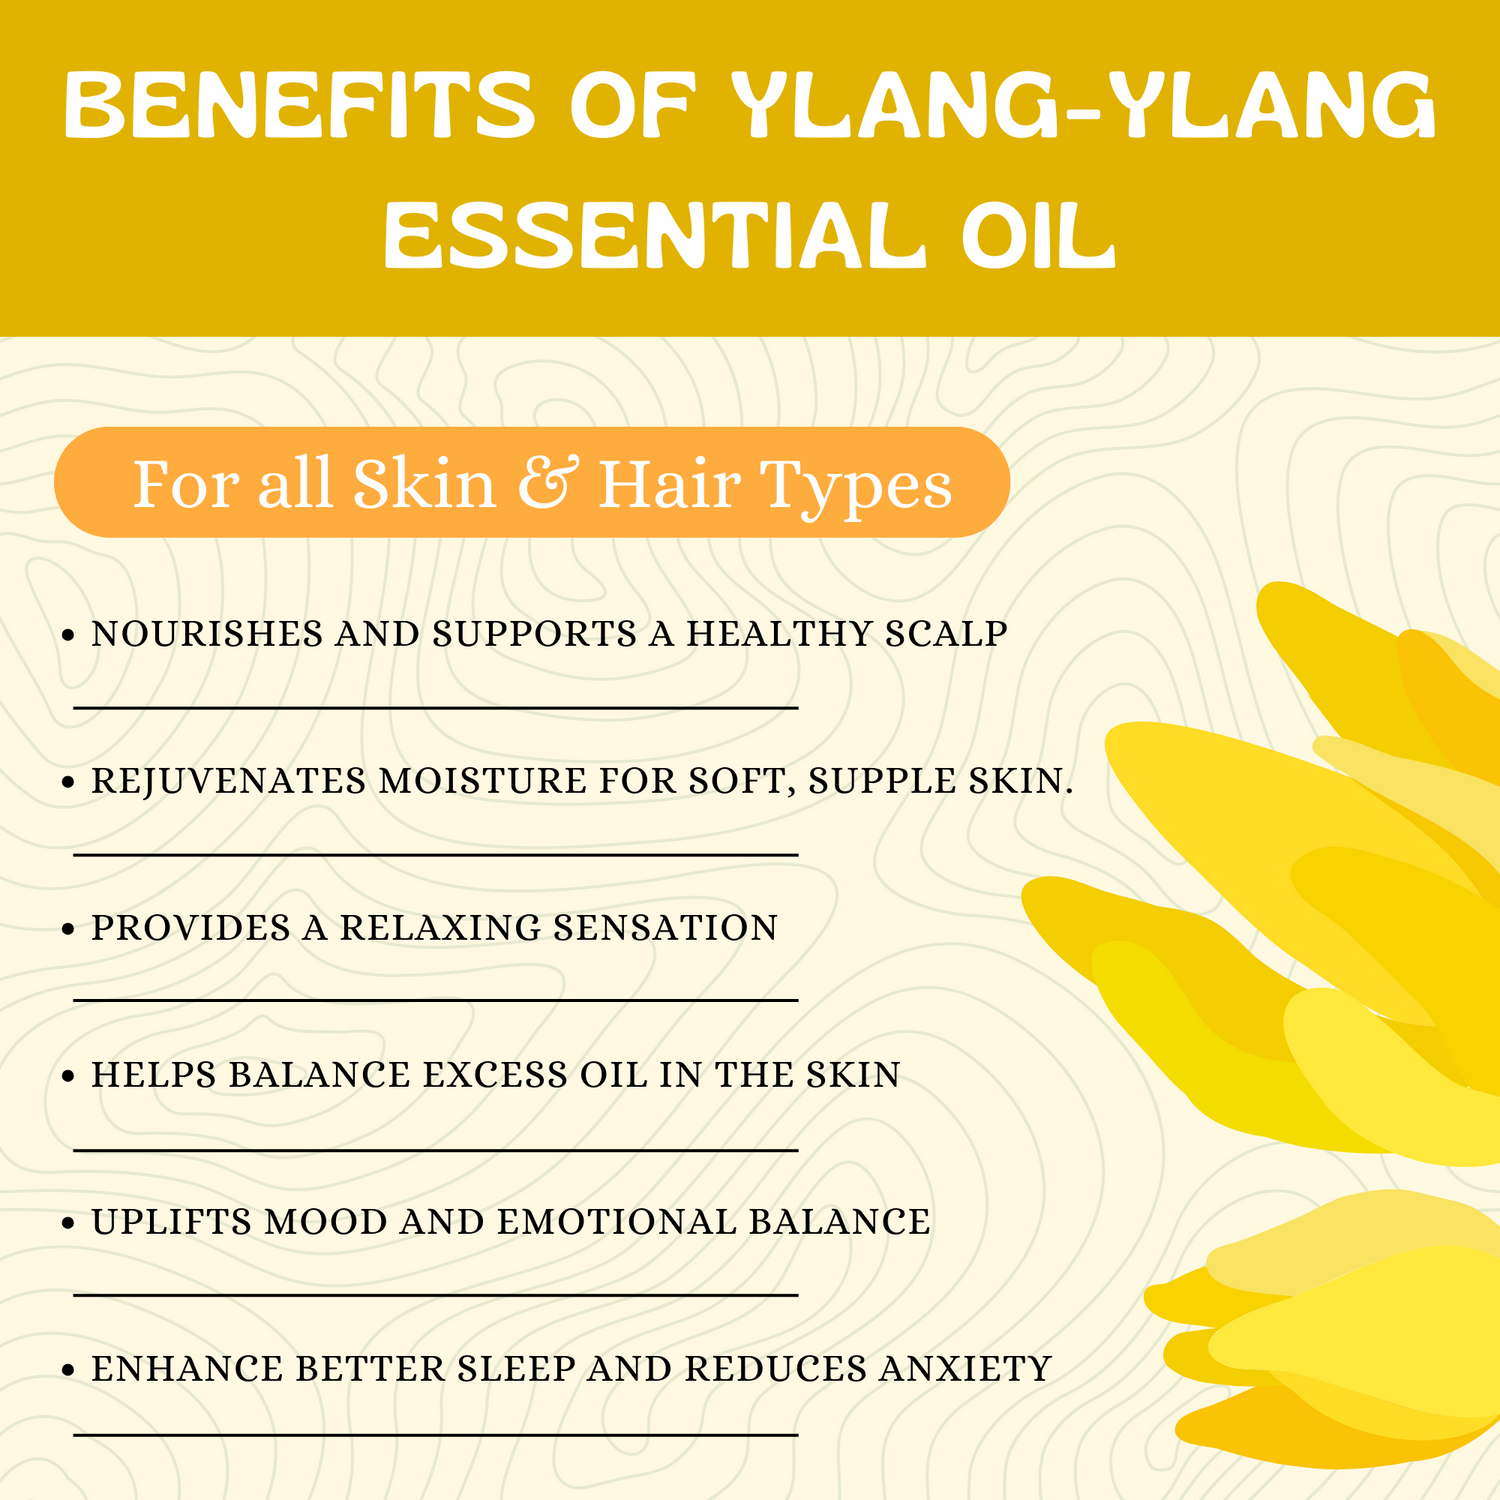 Havintha Ylang-Ylang Essential Oil For Deminishes Acne and Helpful For Hair Lice - Pure Aroma - 15ml.